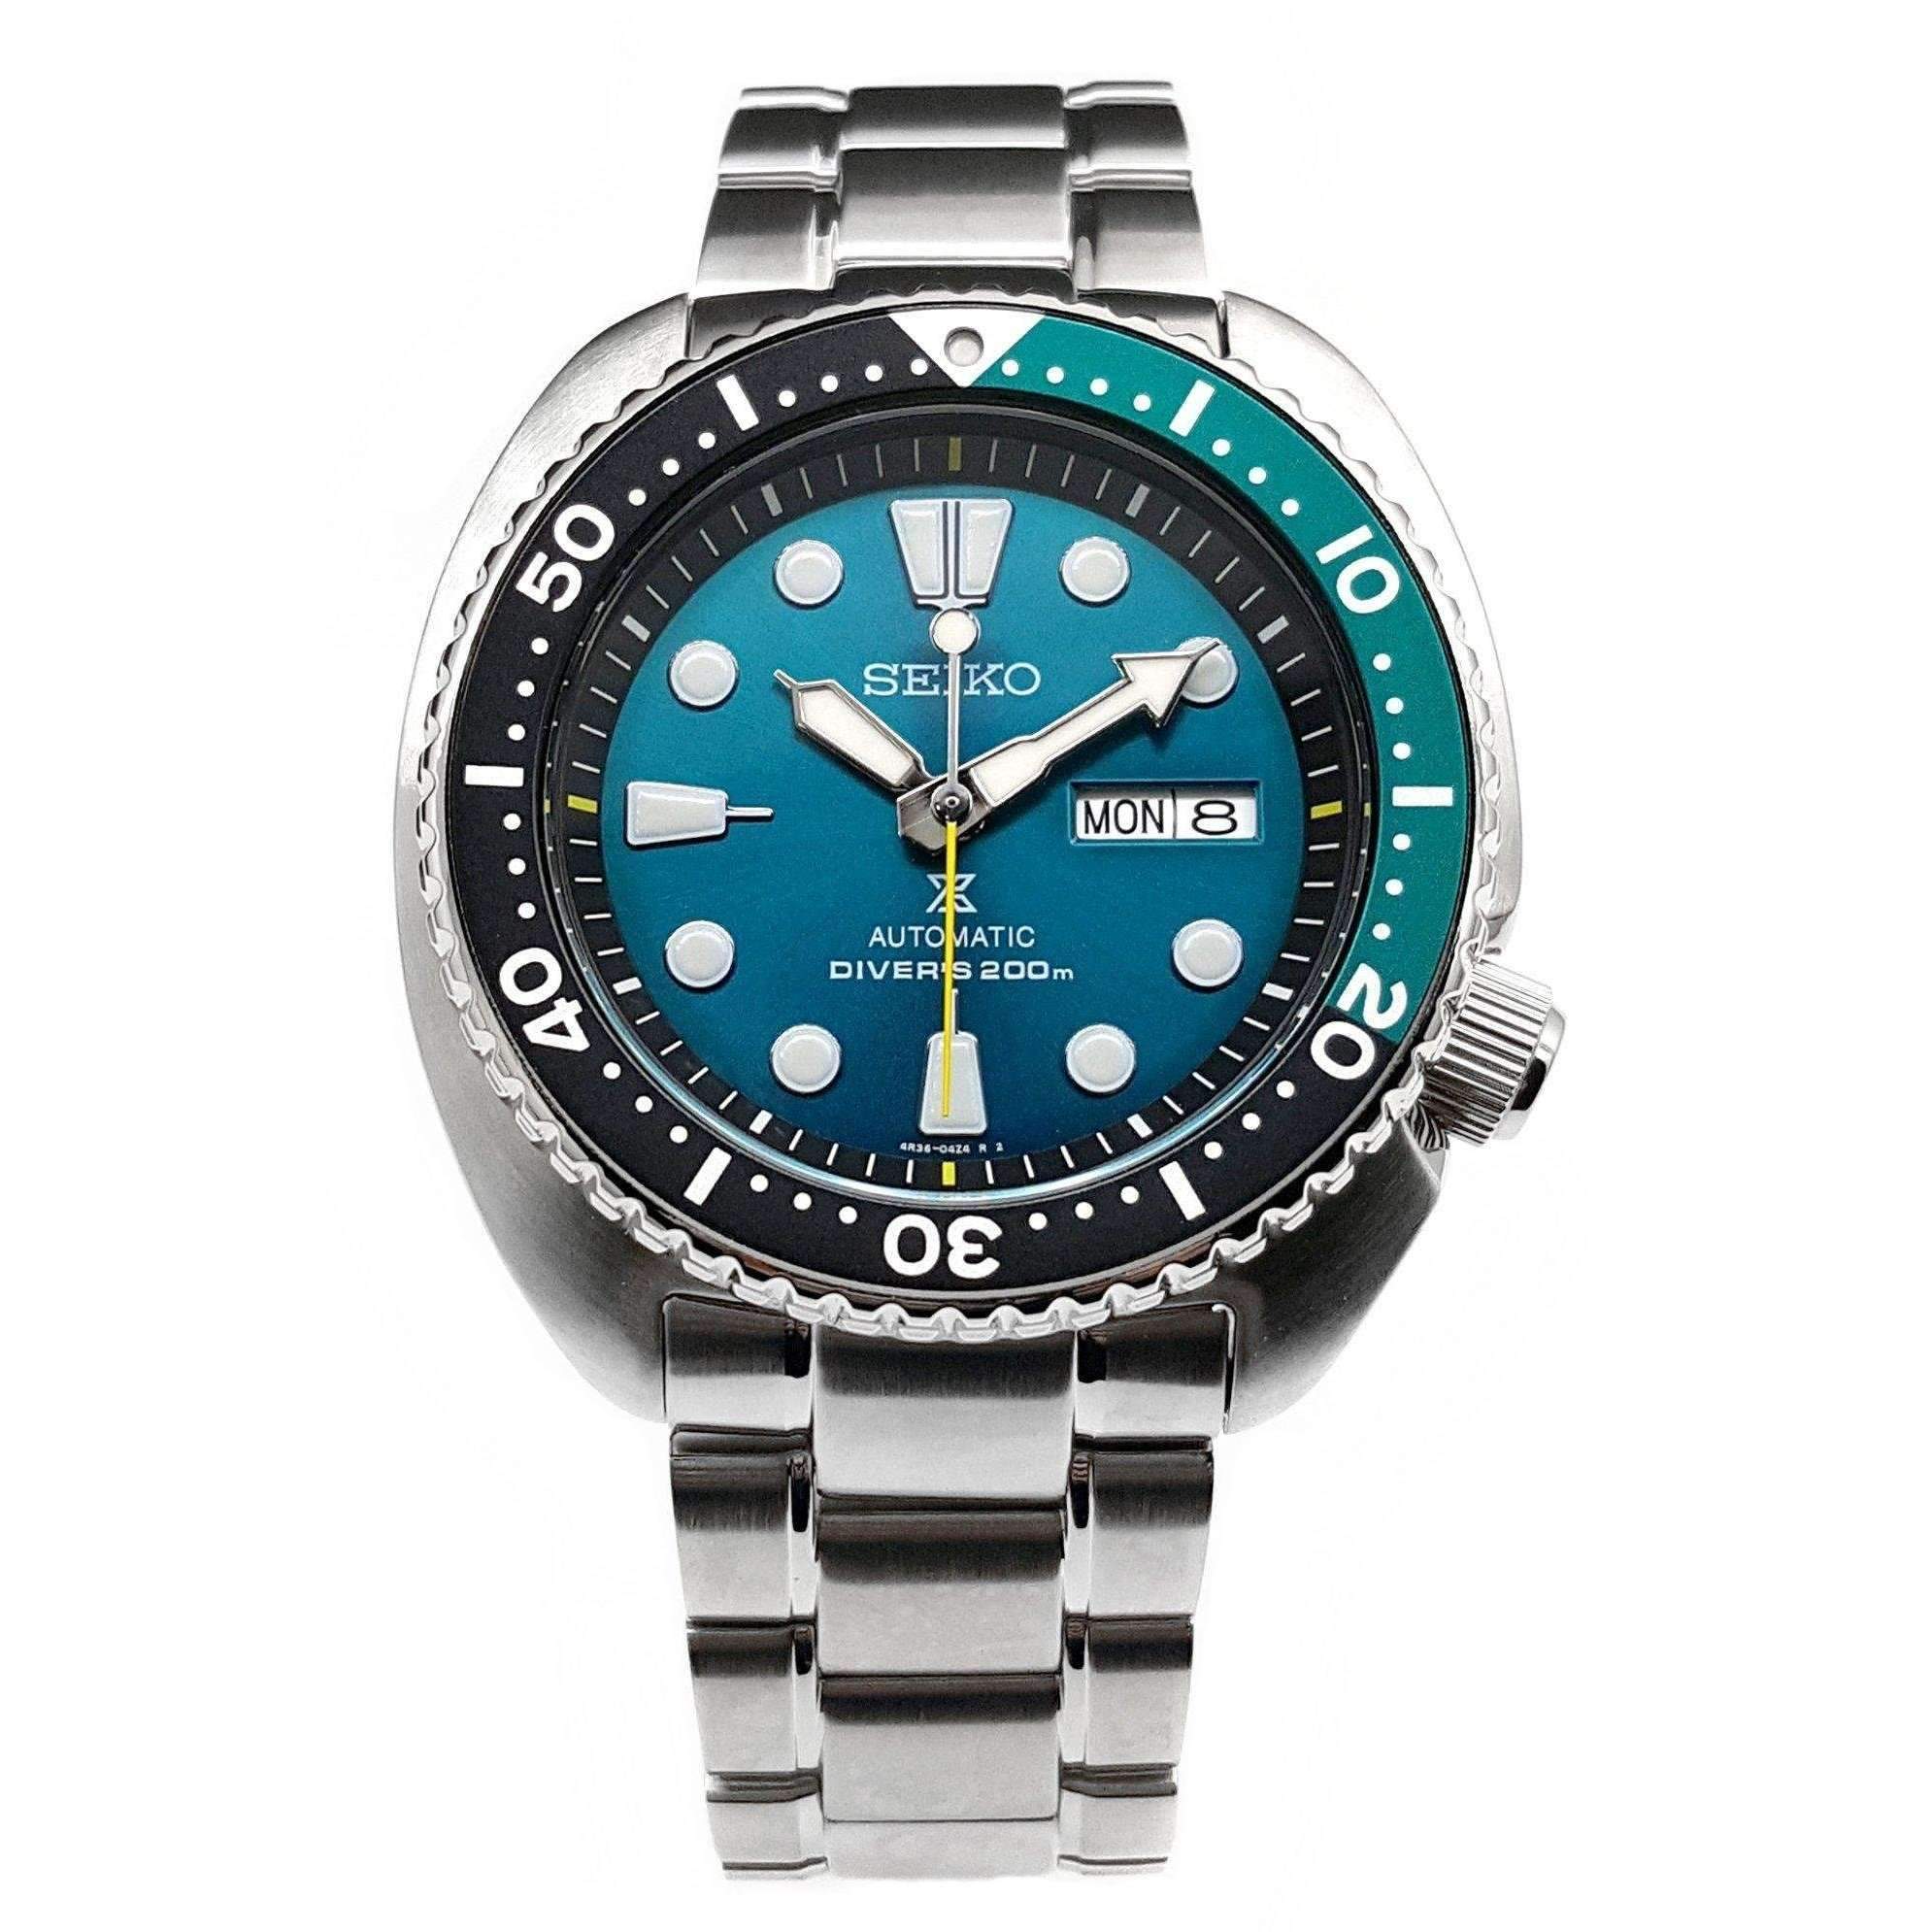 SEIKO PROSPEX GREEN TURTLE WATCH (Limited Edition) SRPB01 - ROOK JAPAN